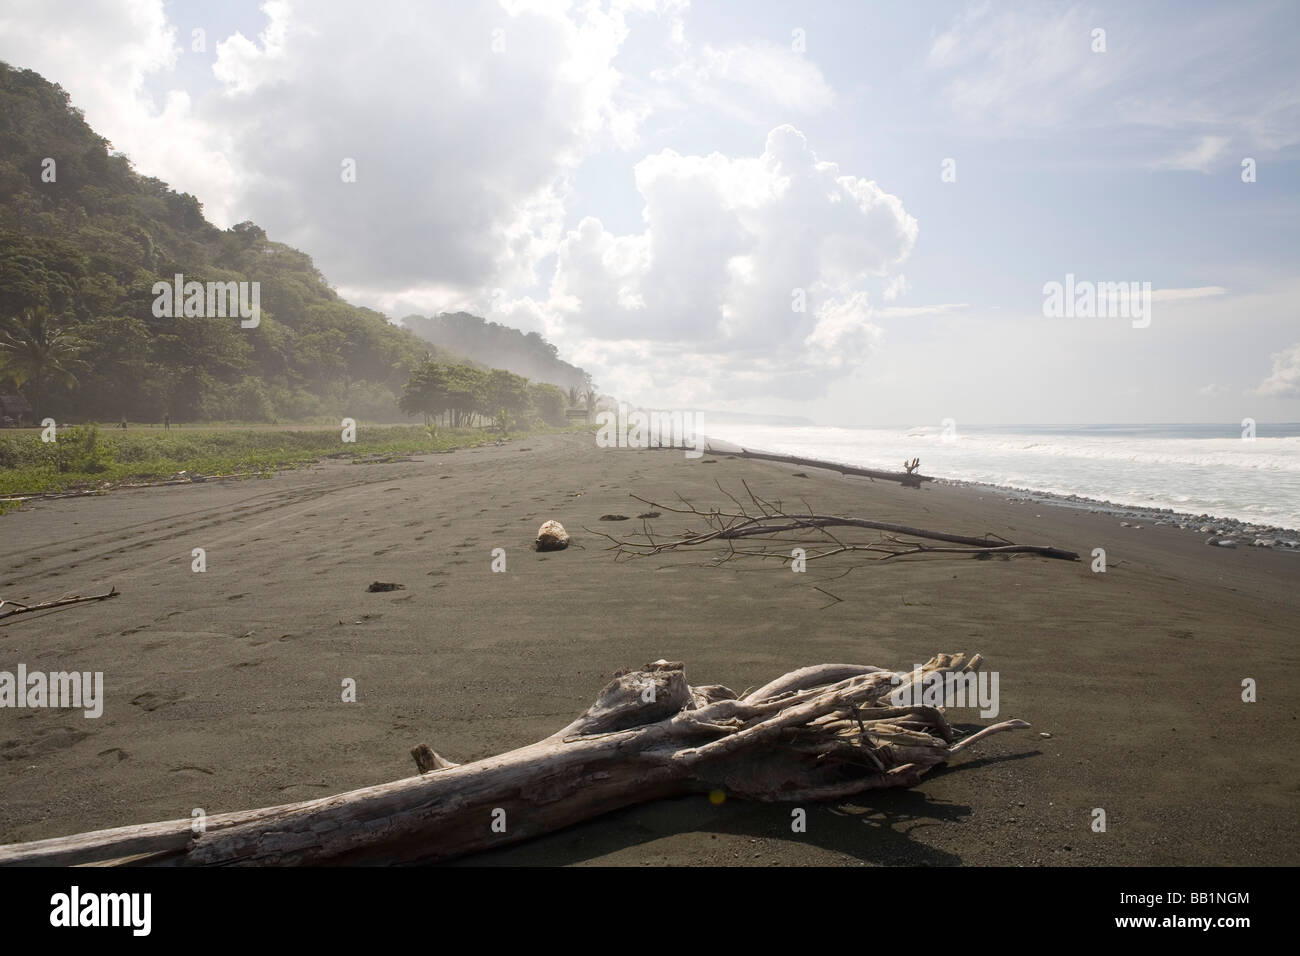 The empty coastline of the Osa Peninsula in the Corcovado National Park, Costa Rica Stock Photo